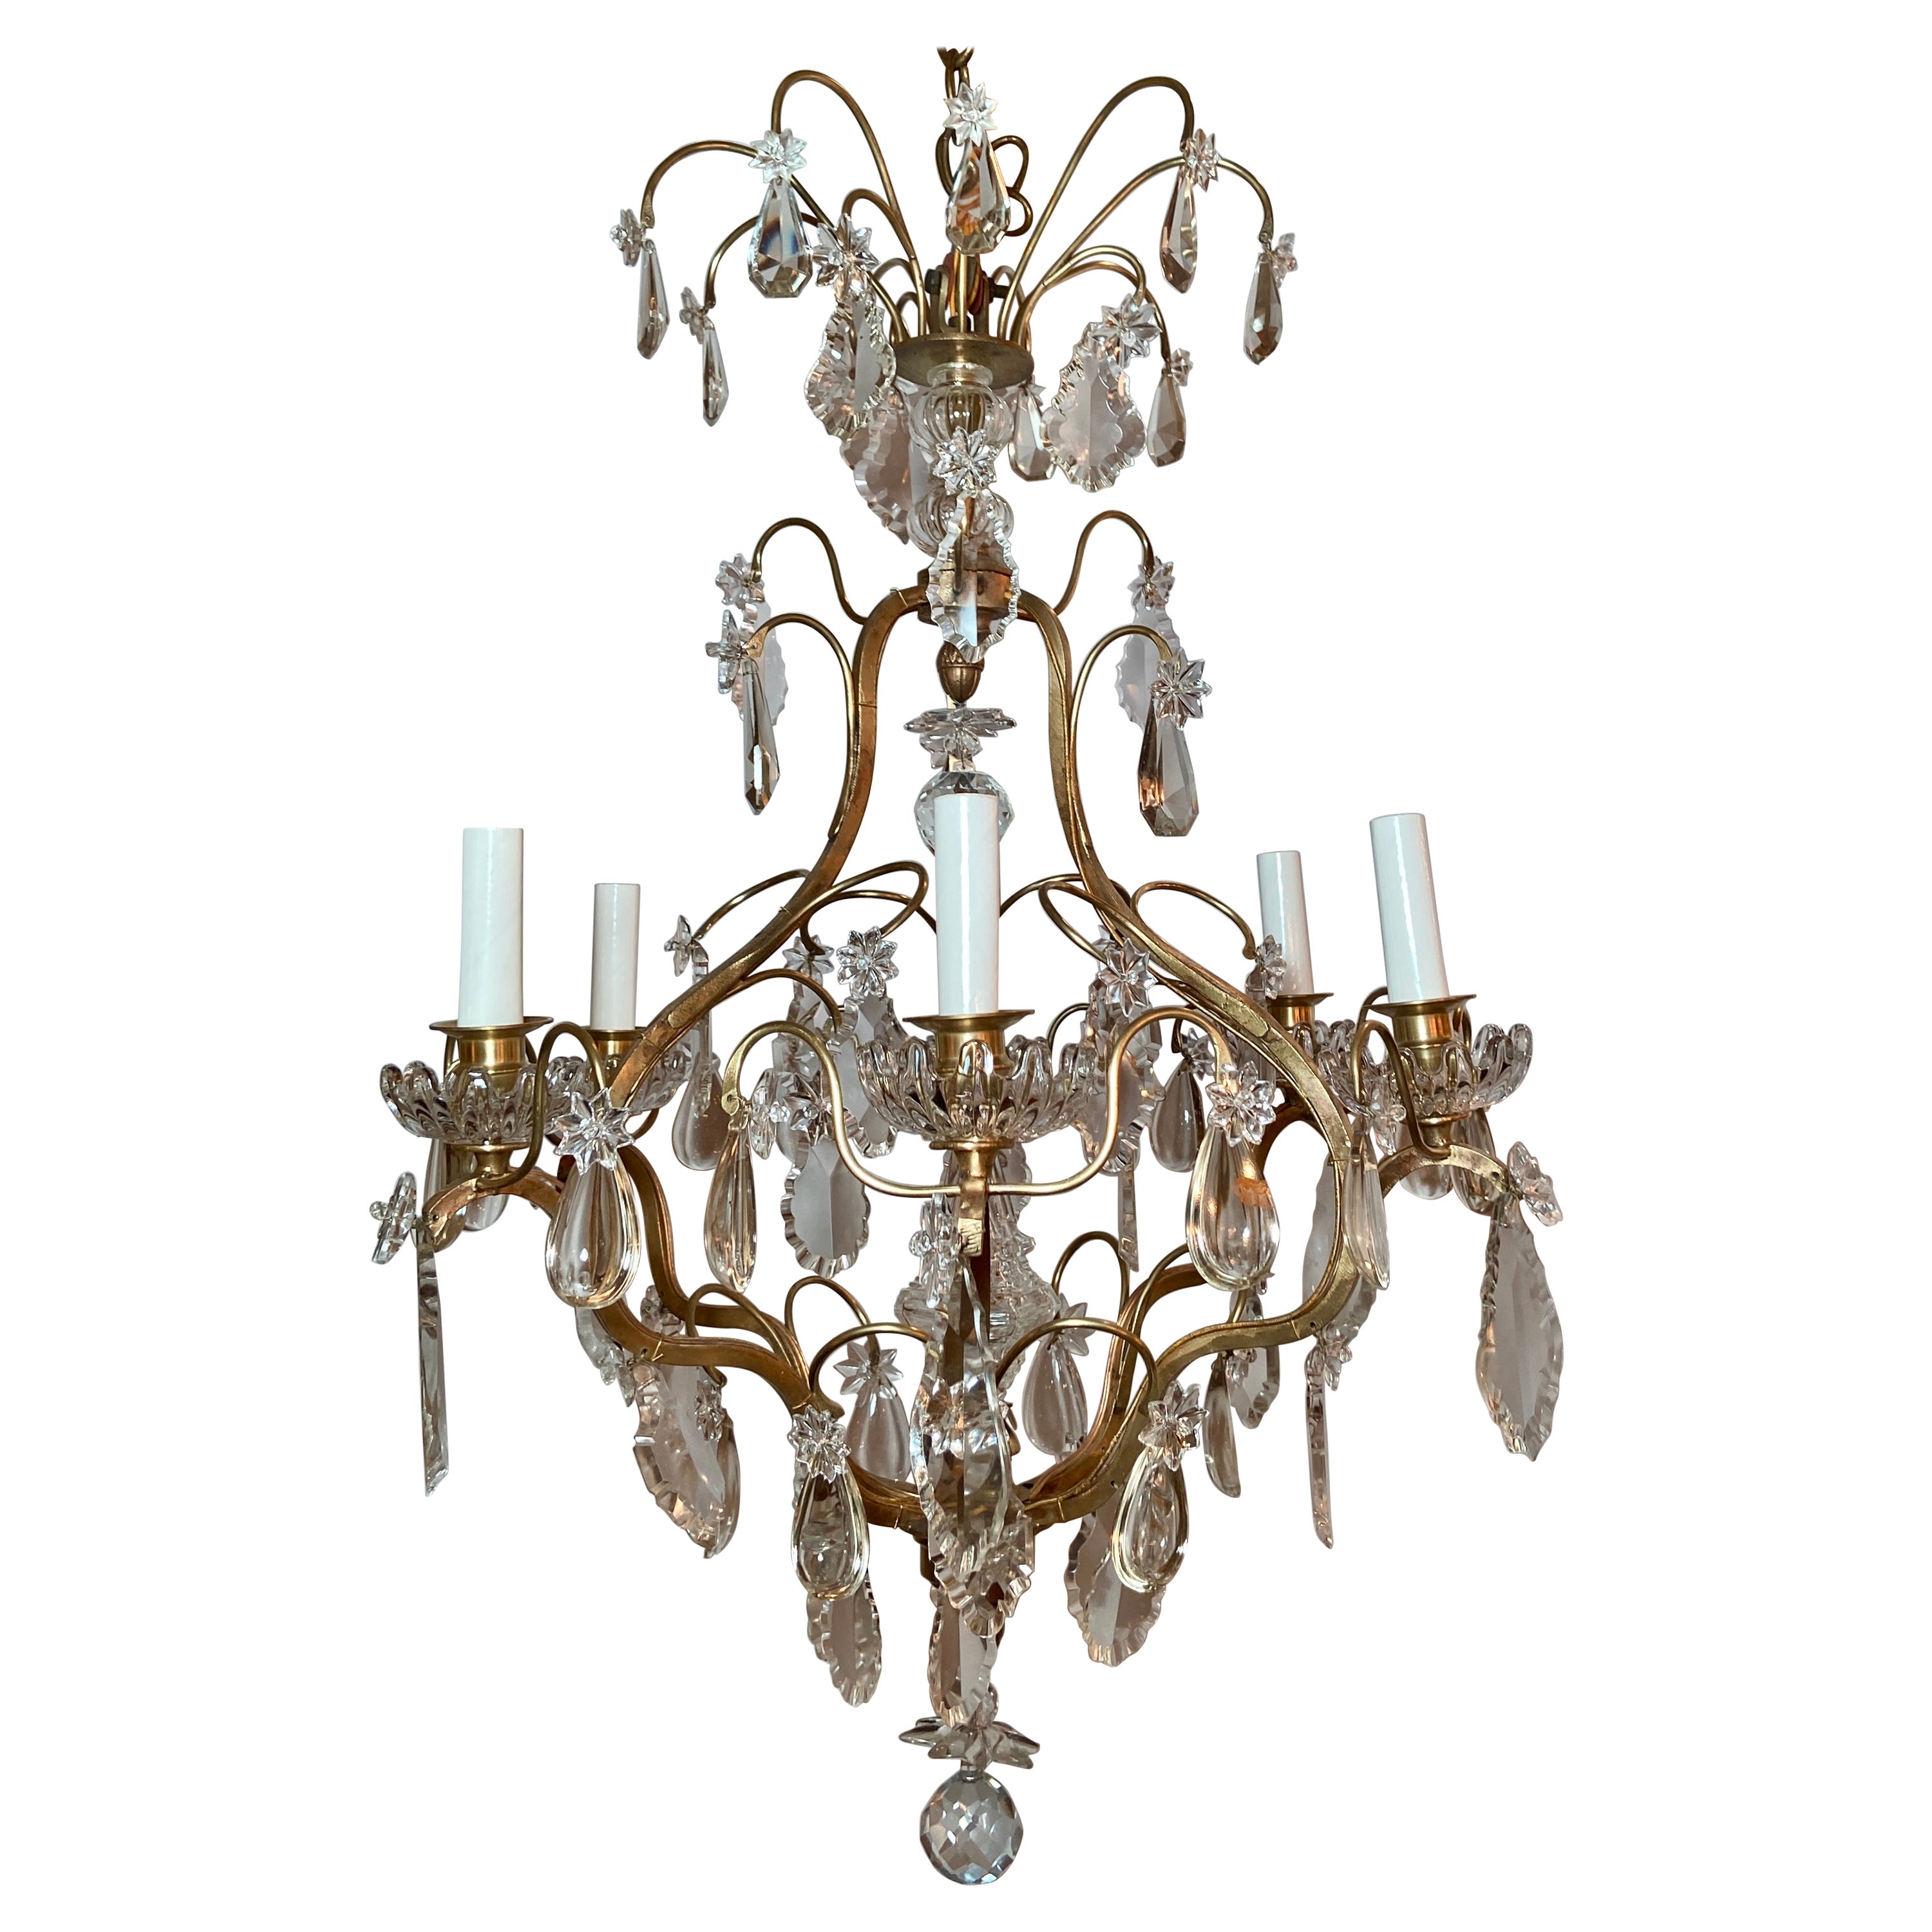 Antique French Gold Bronze and Crystal Chandelier, Circa 1890